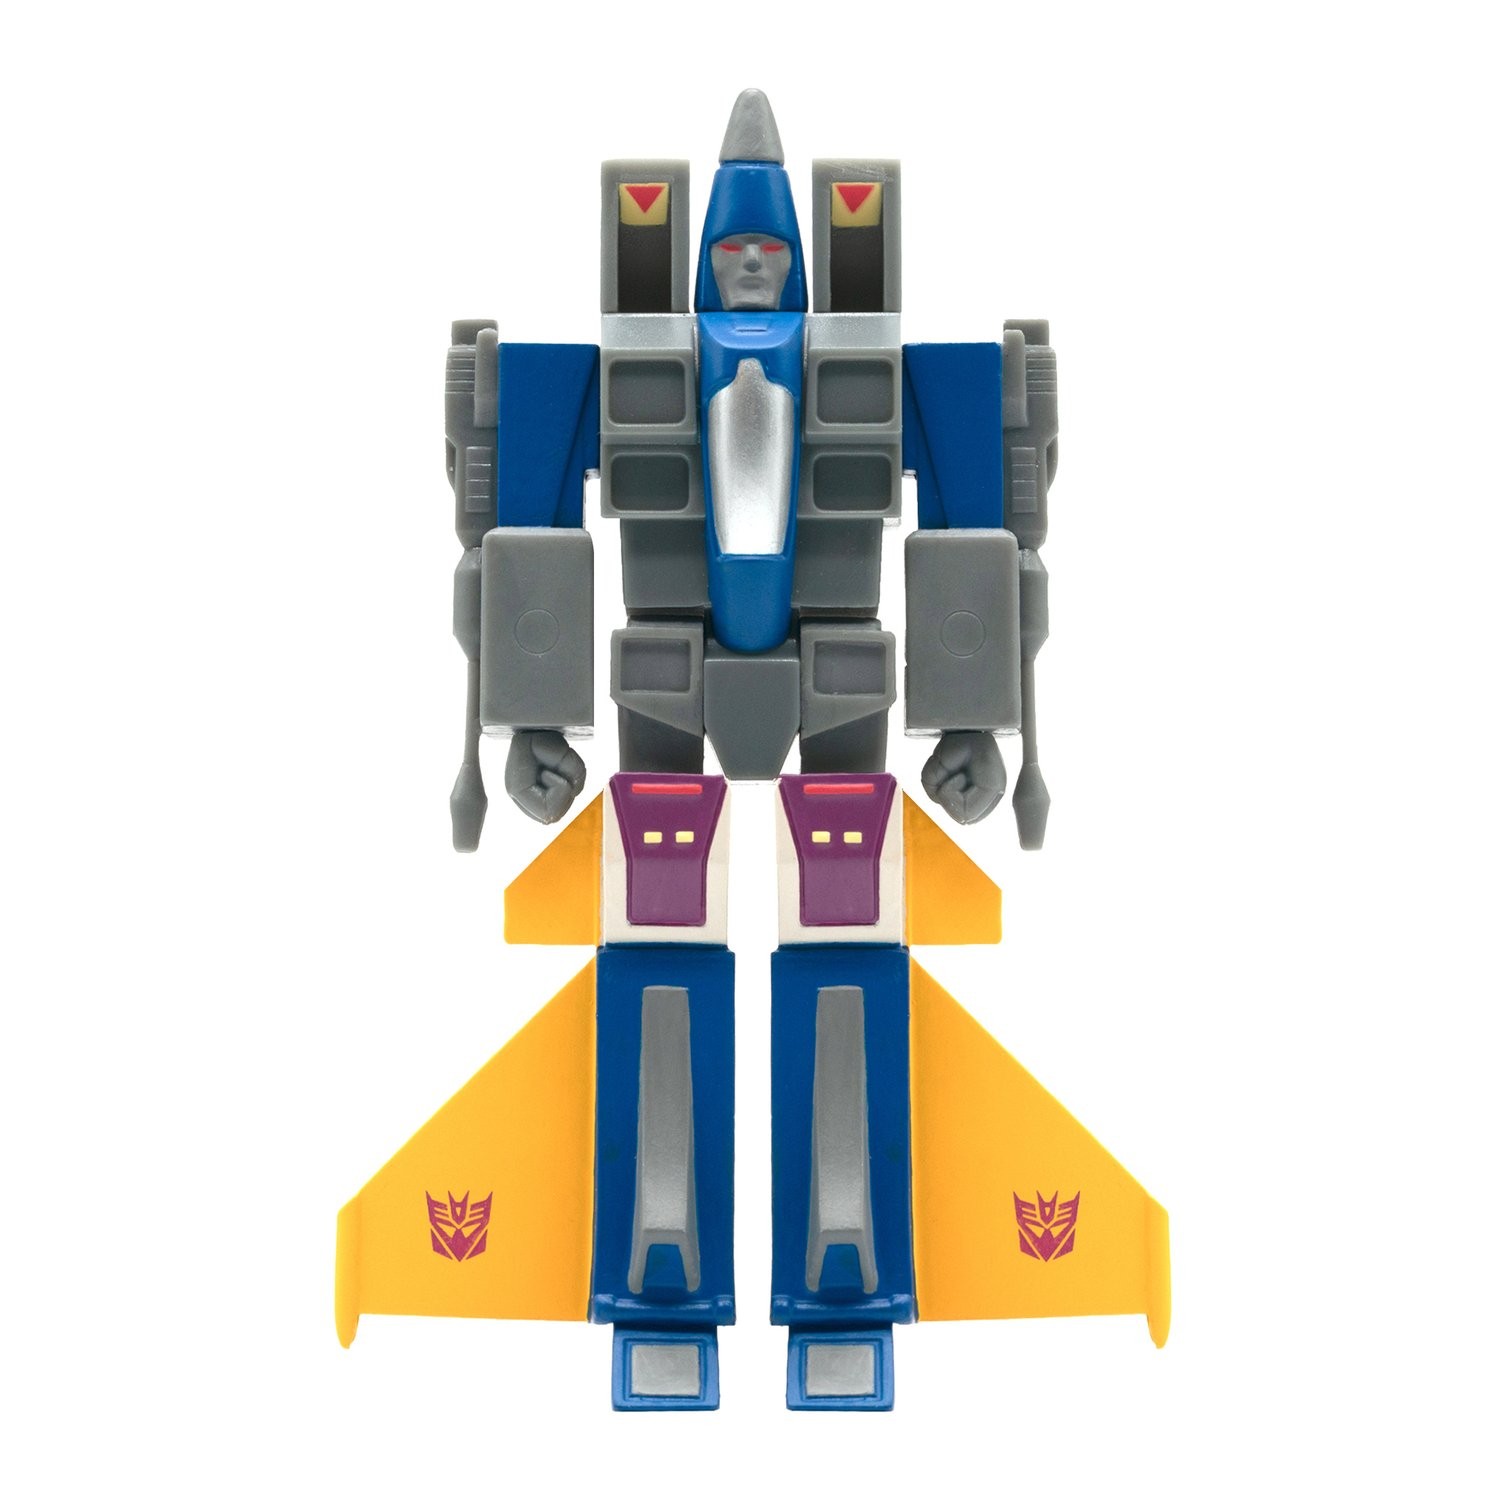 Transformers News: New Super7 Transformers ReActions Figures Revealed- Blitzwing, Perceptor, Dirge and Blaster